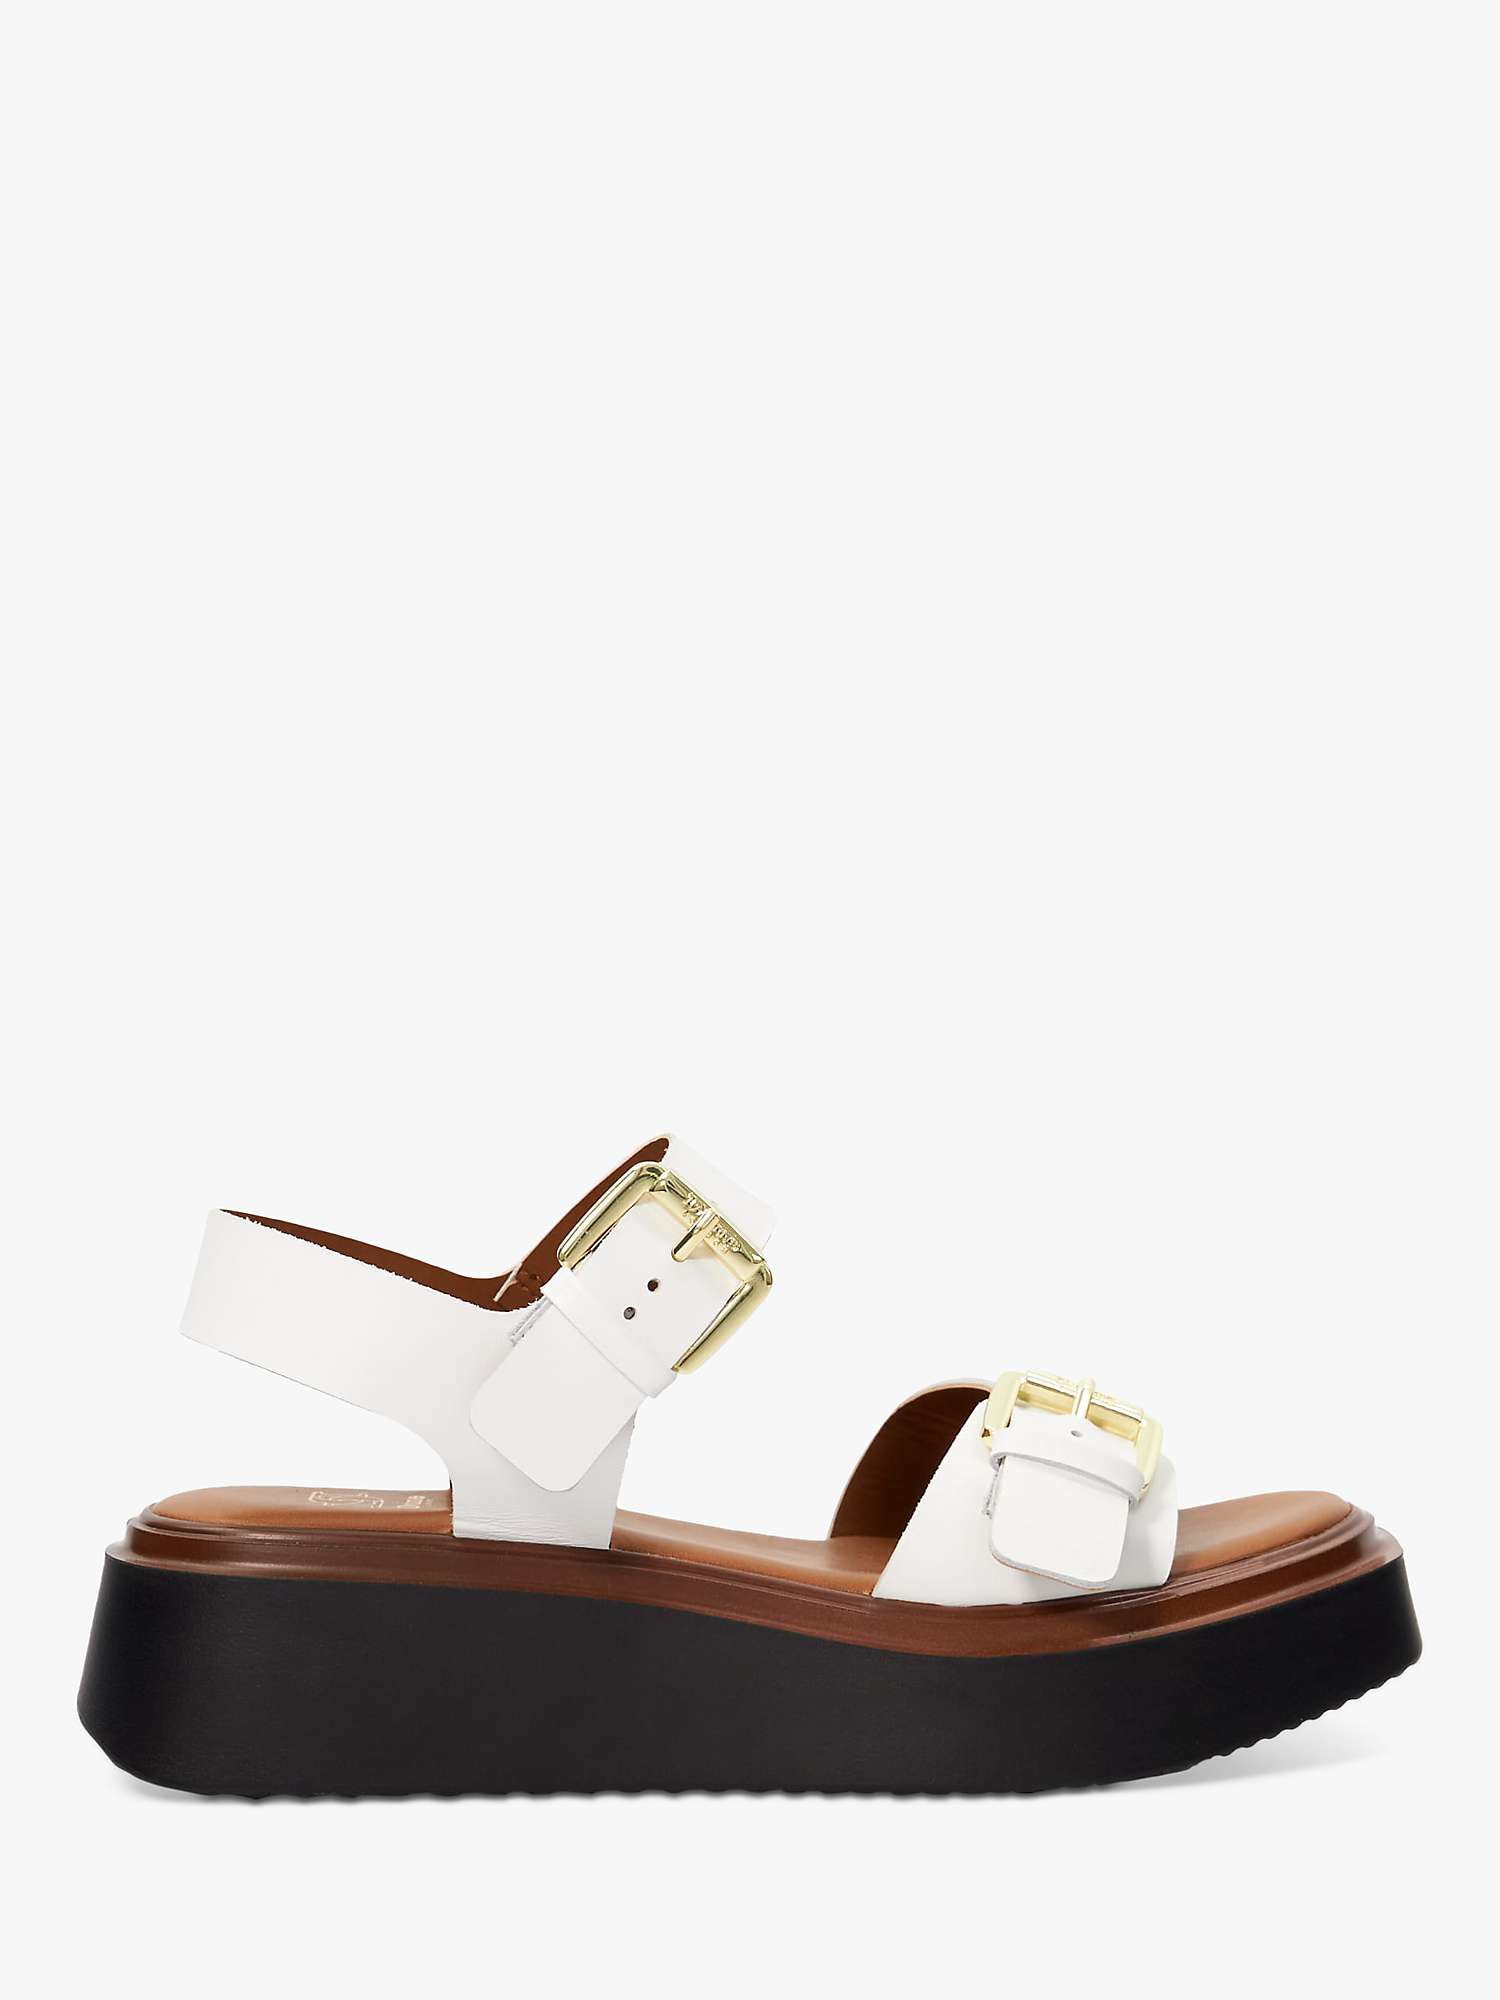 Buy Dune Loells Leather Buckle Sandals, White Online at johnlewis.com